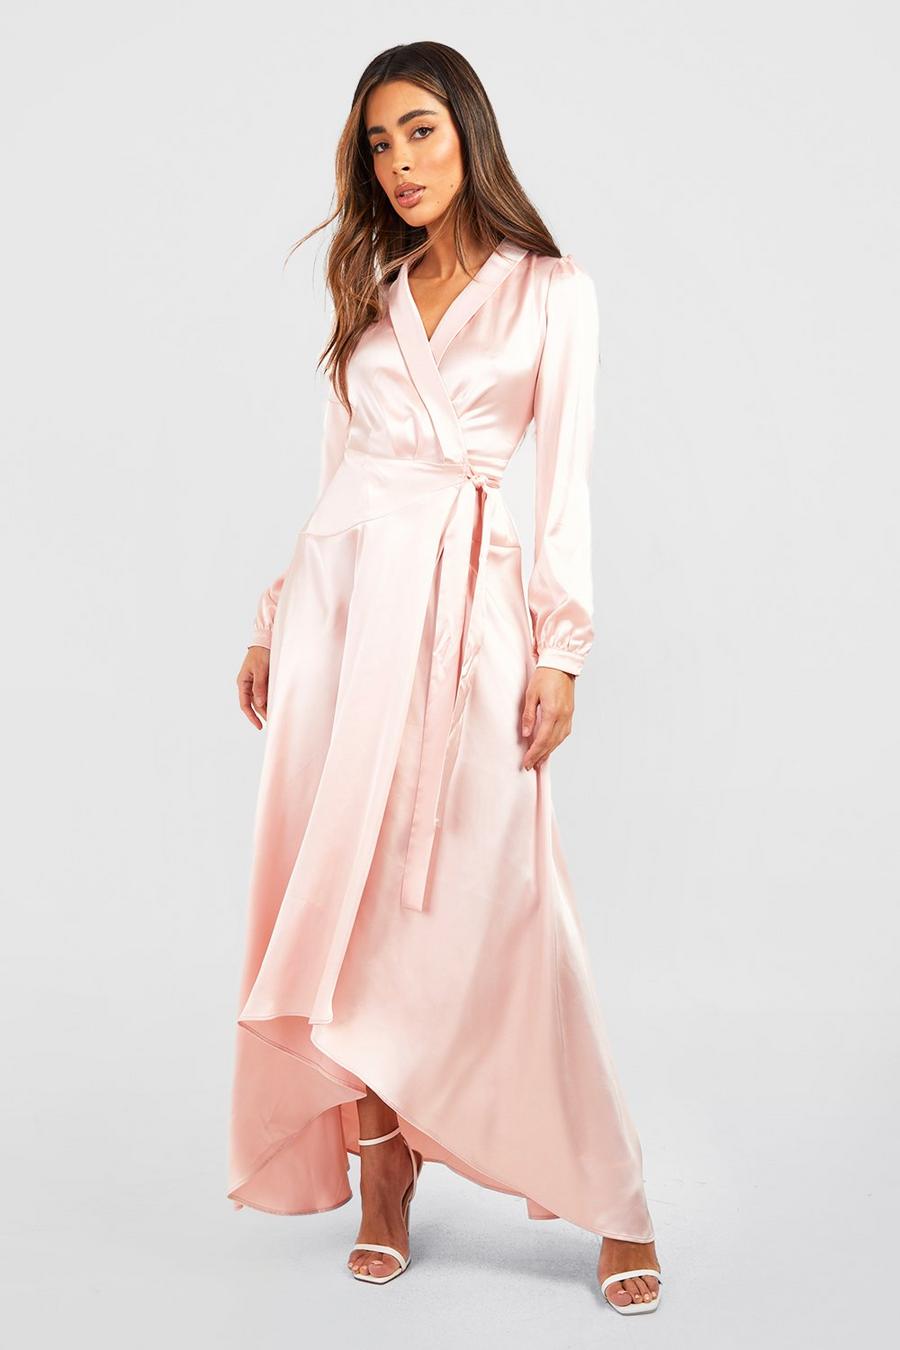 Champagne Satin Wrap Belted Maxi Dress